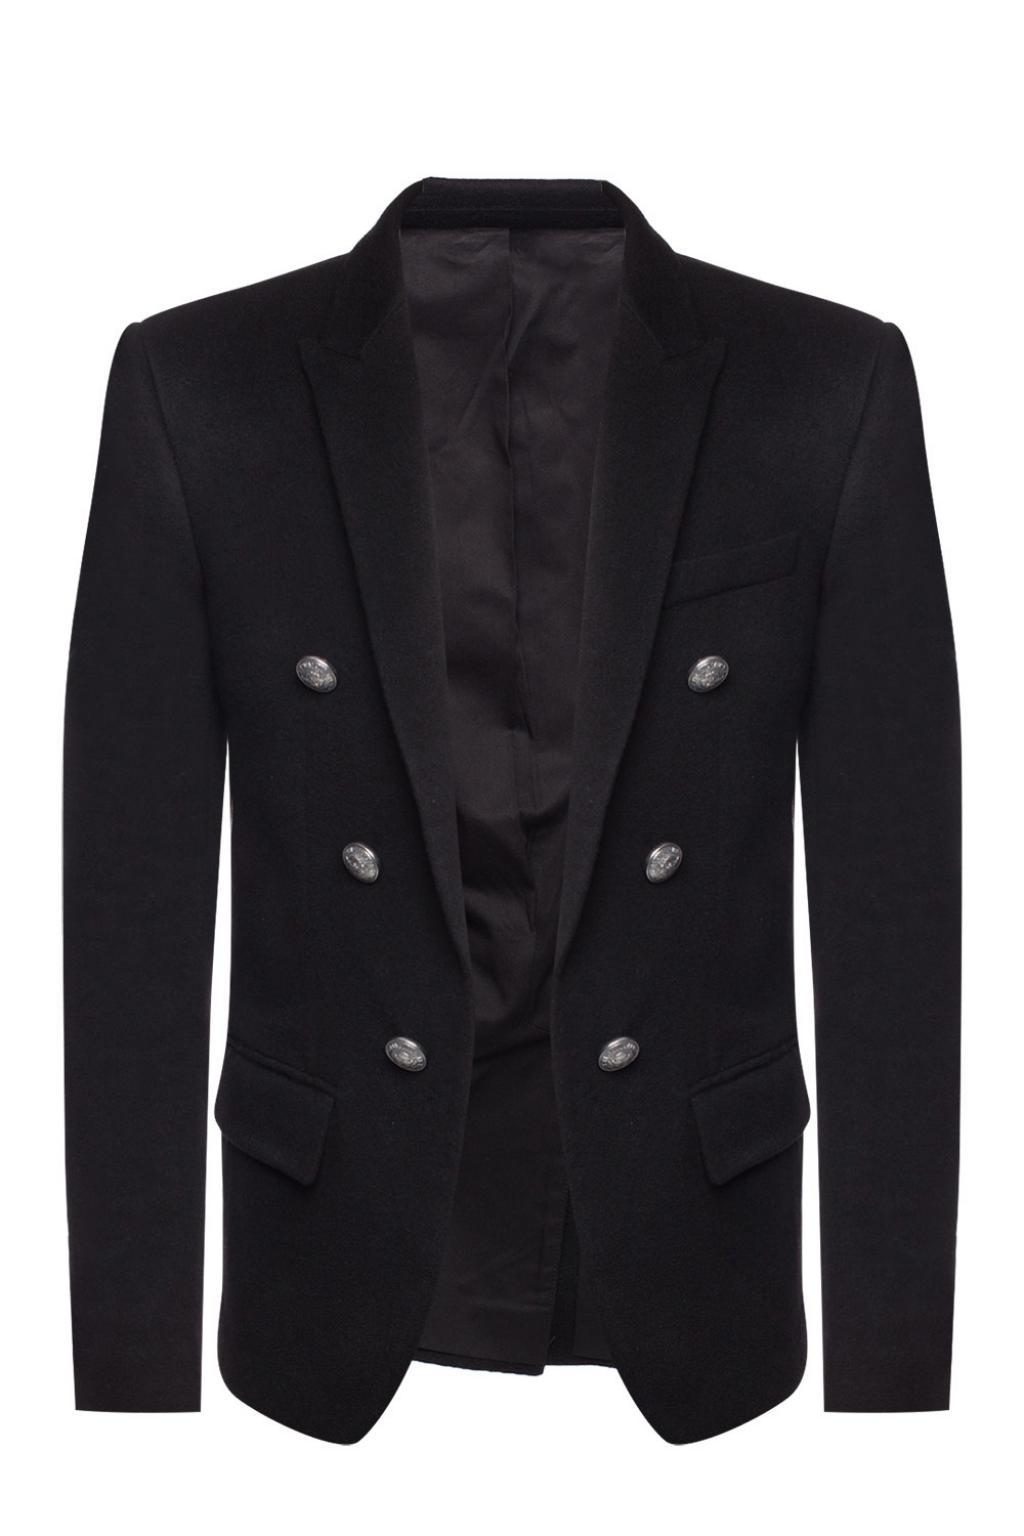 Balmain Cashmere Blazer With Decorative Buttons in Black for Men - Lyst